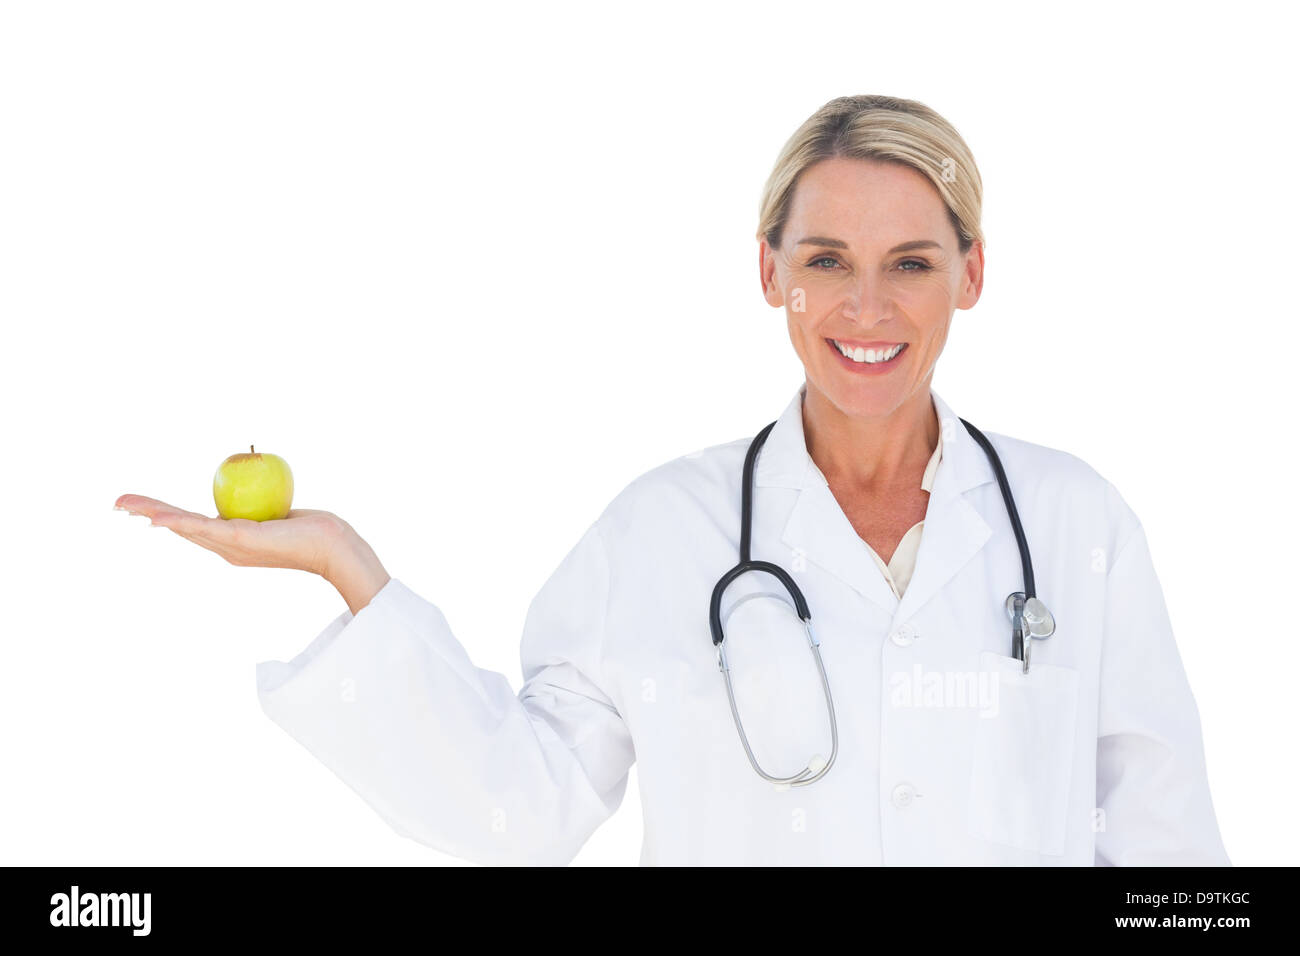 Happy doctor holding apple et looking at camera Banque D'Images